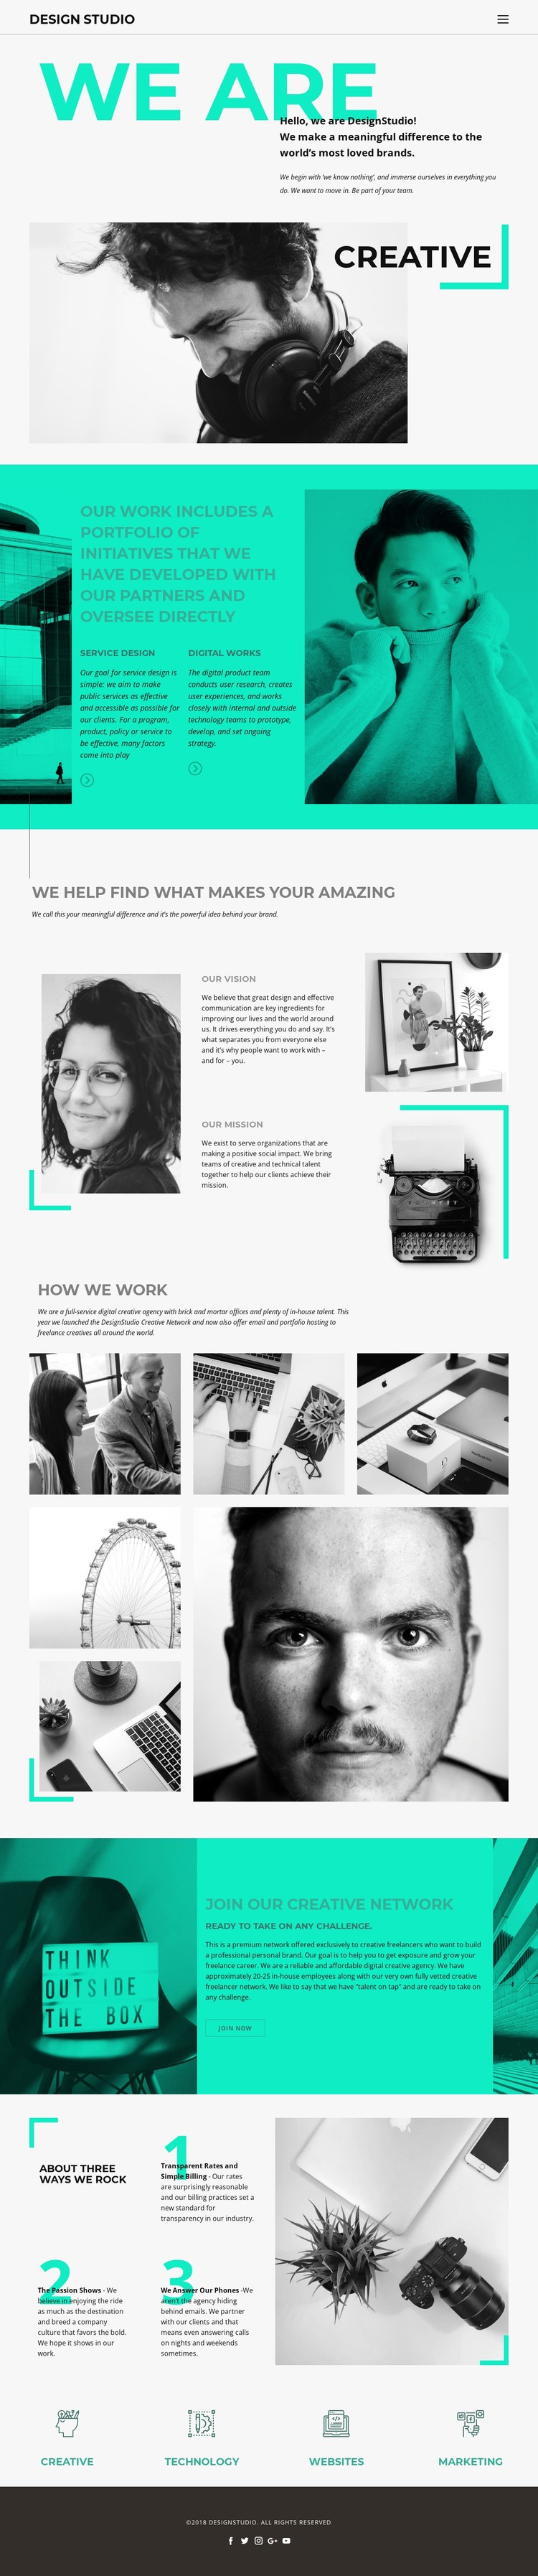 We are creative business CSS Template